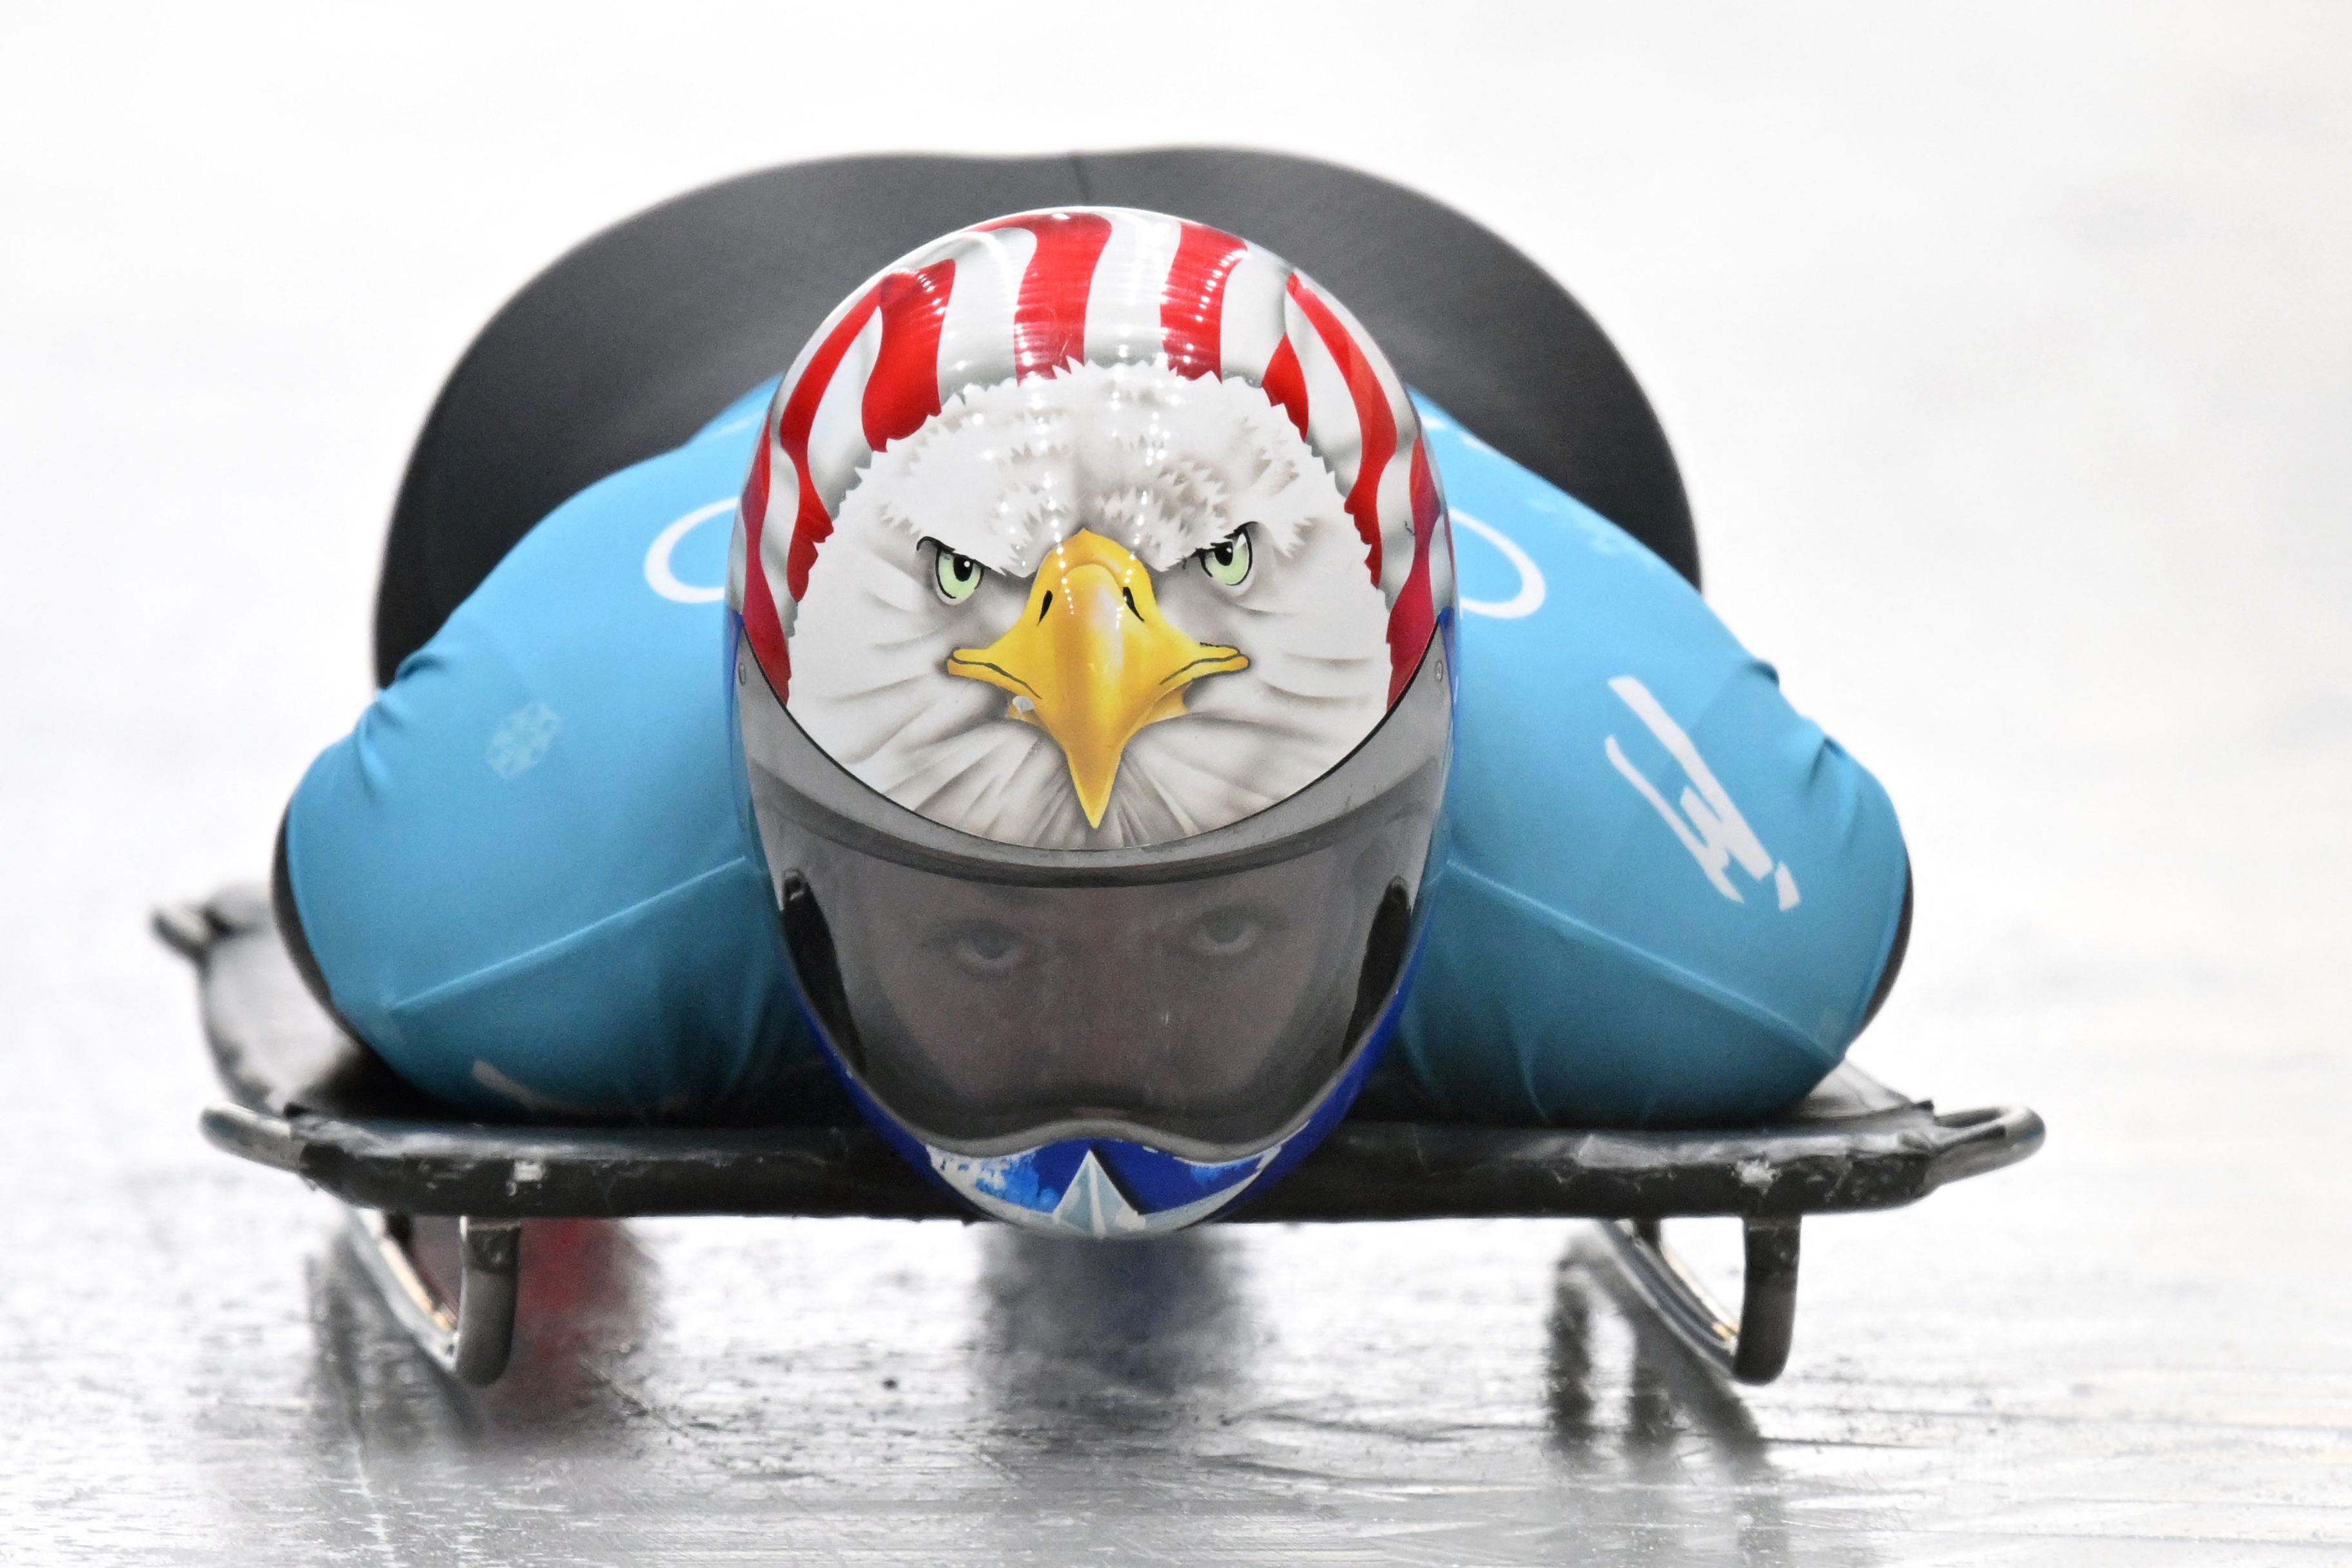 USA's Katie Uhlaender takes part in the women's skeleton training at the Yanqing National Sliding Centre during the Beijing 2022 Winter Olympic Games in Yanqing on February 8